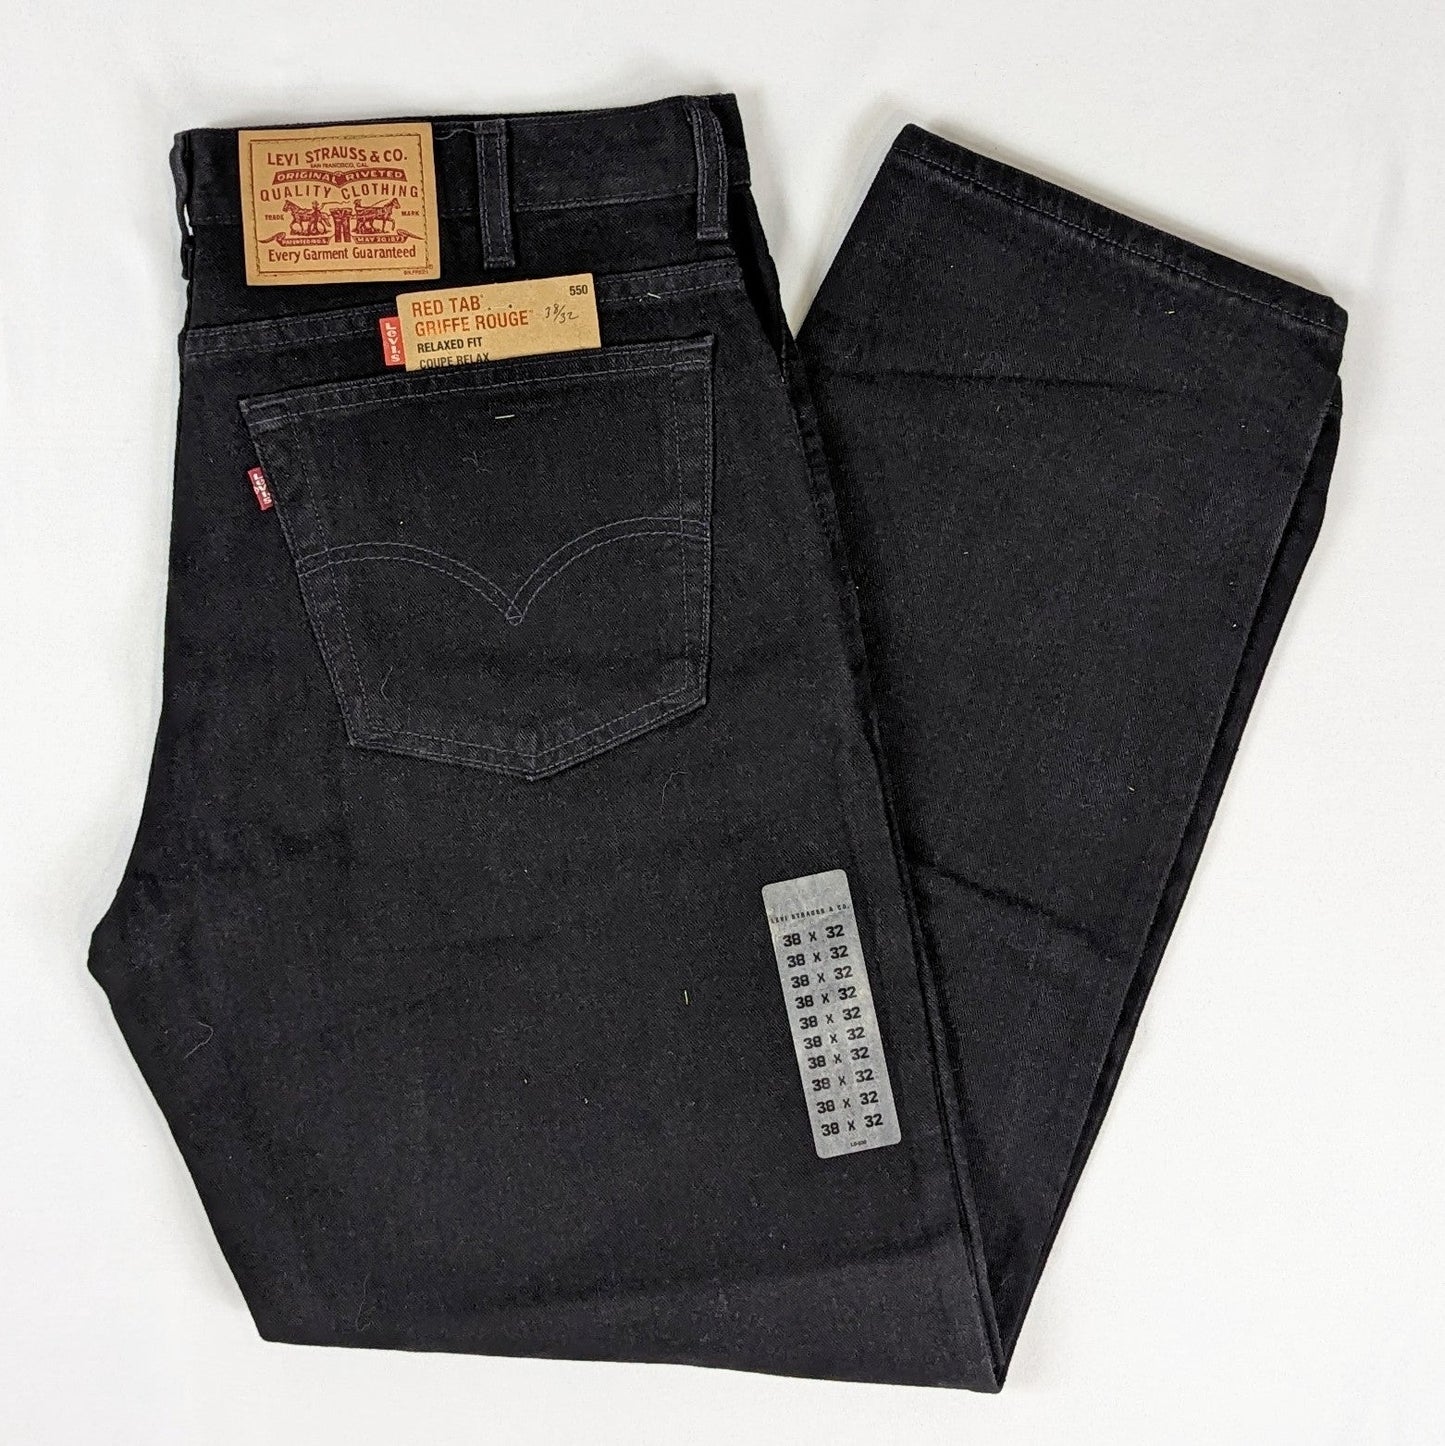 Levis jeans 550 relaxed fit vintage 2001 deadstock made in Canada